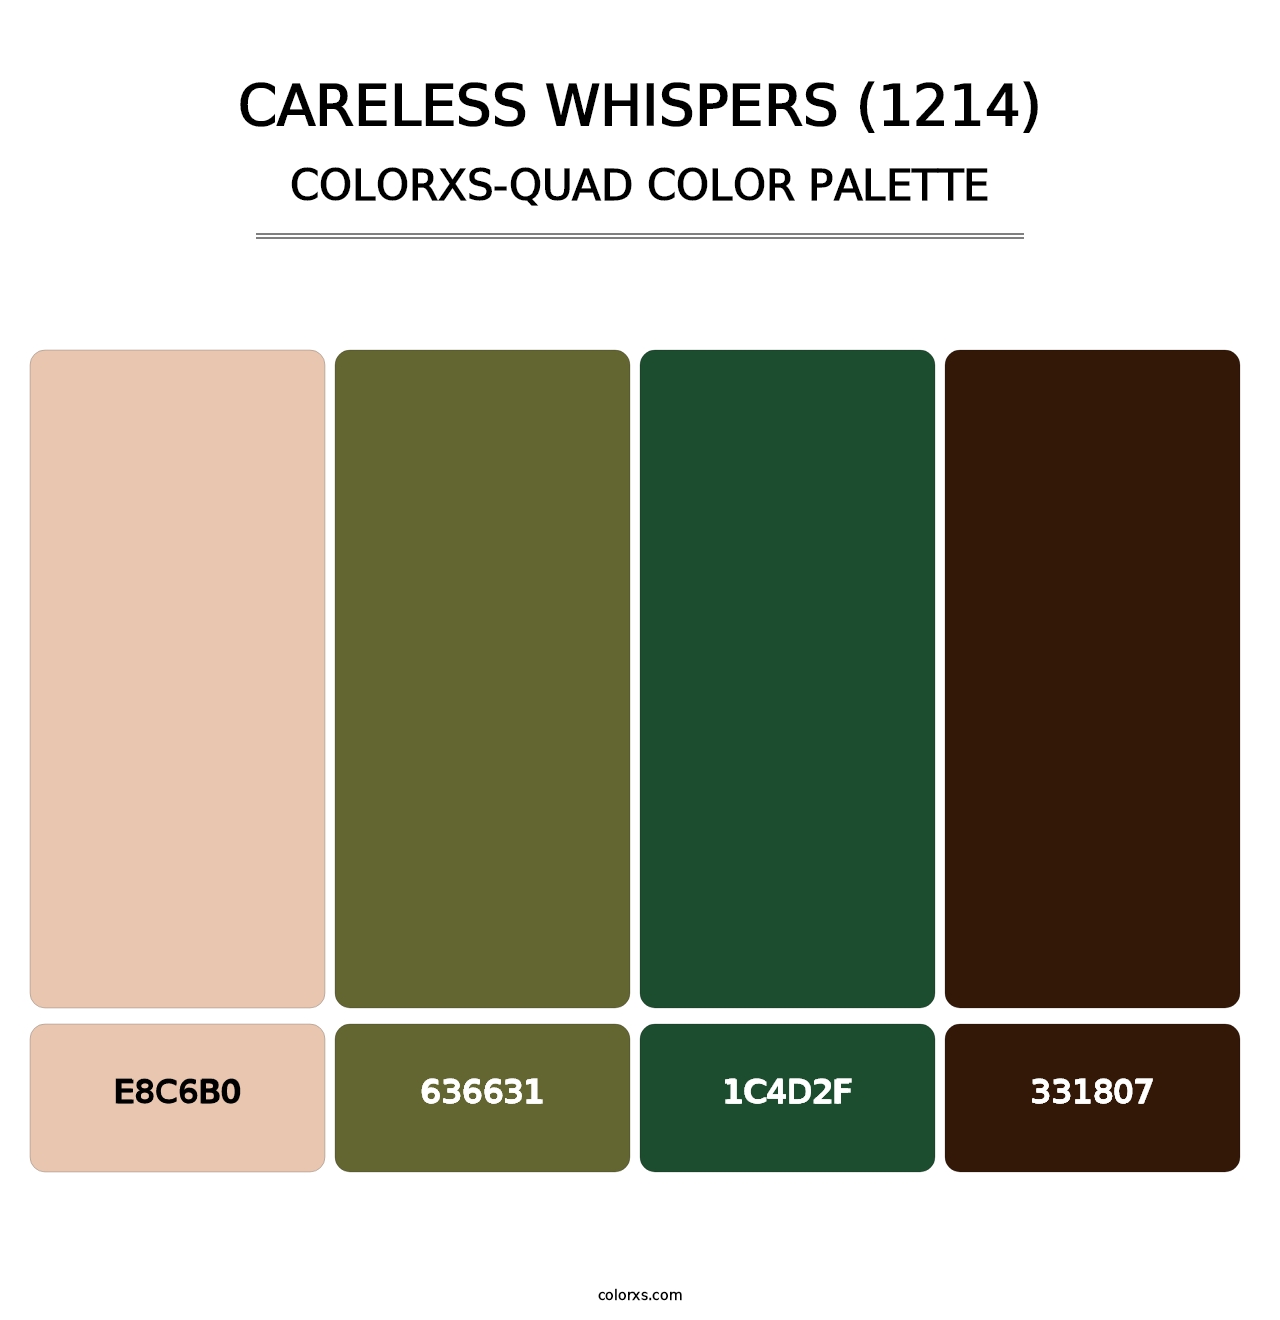 Careless Whispers (1214) - Colorxs Quad Palette